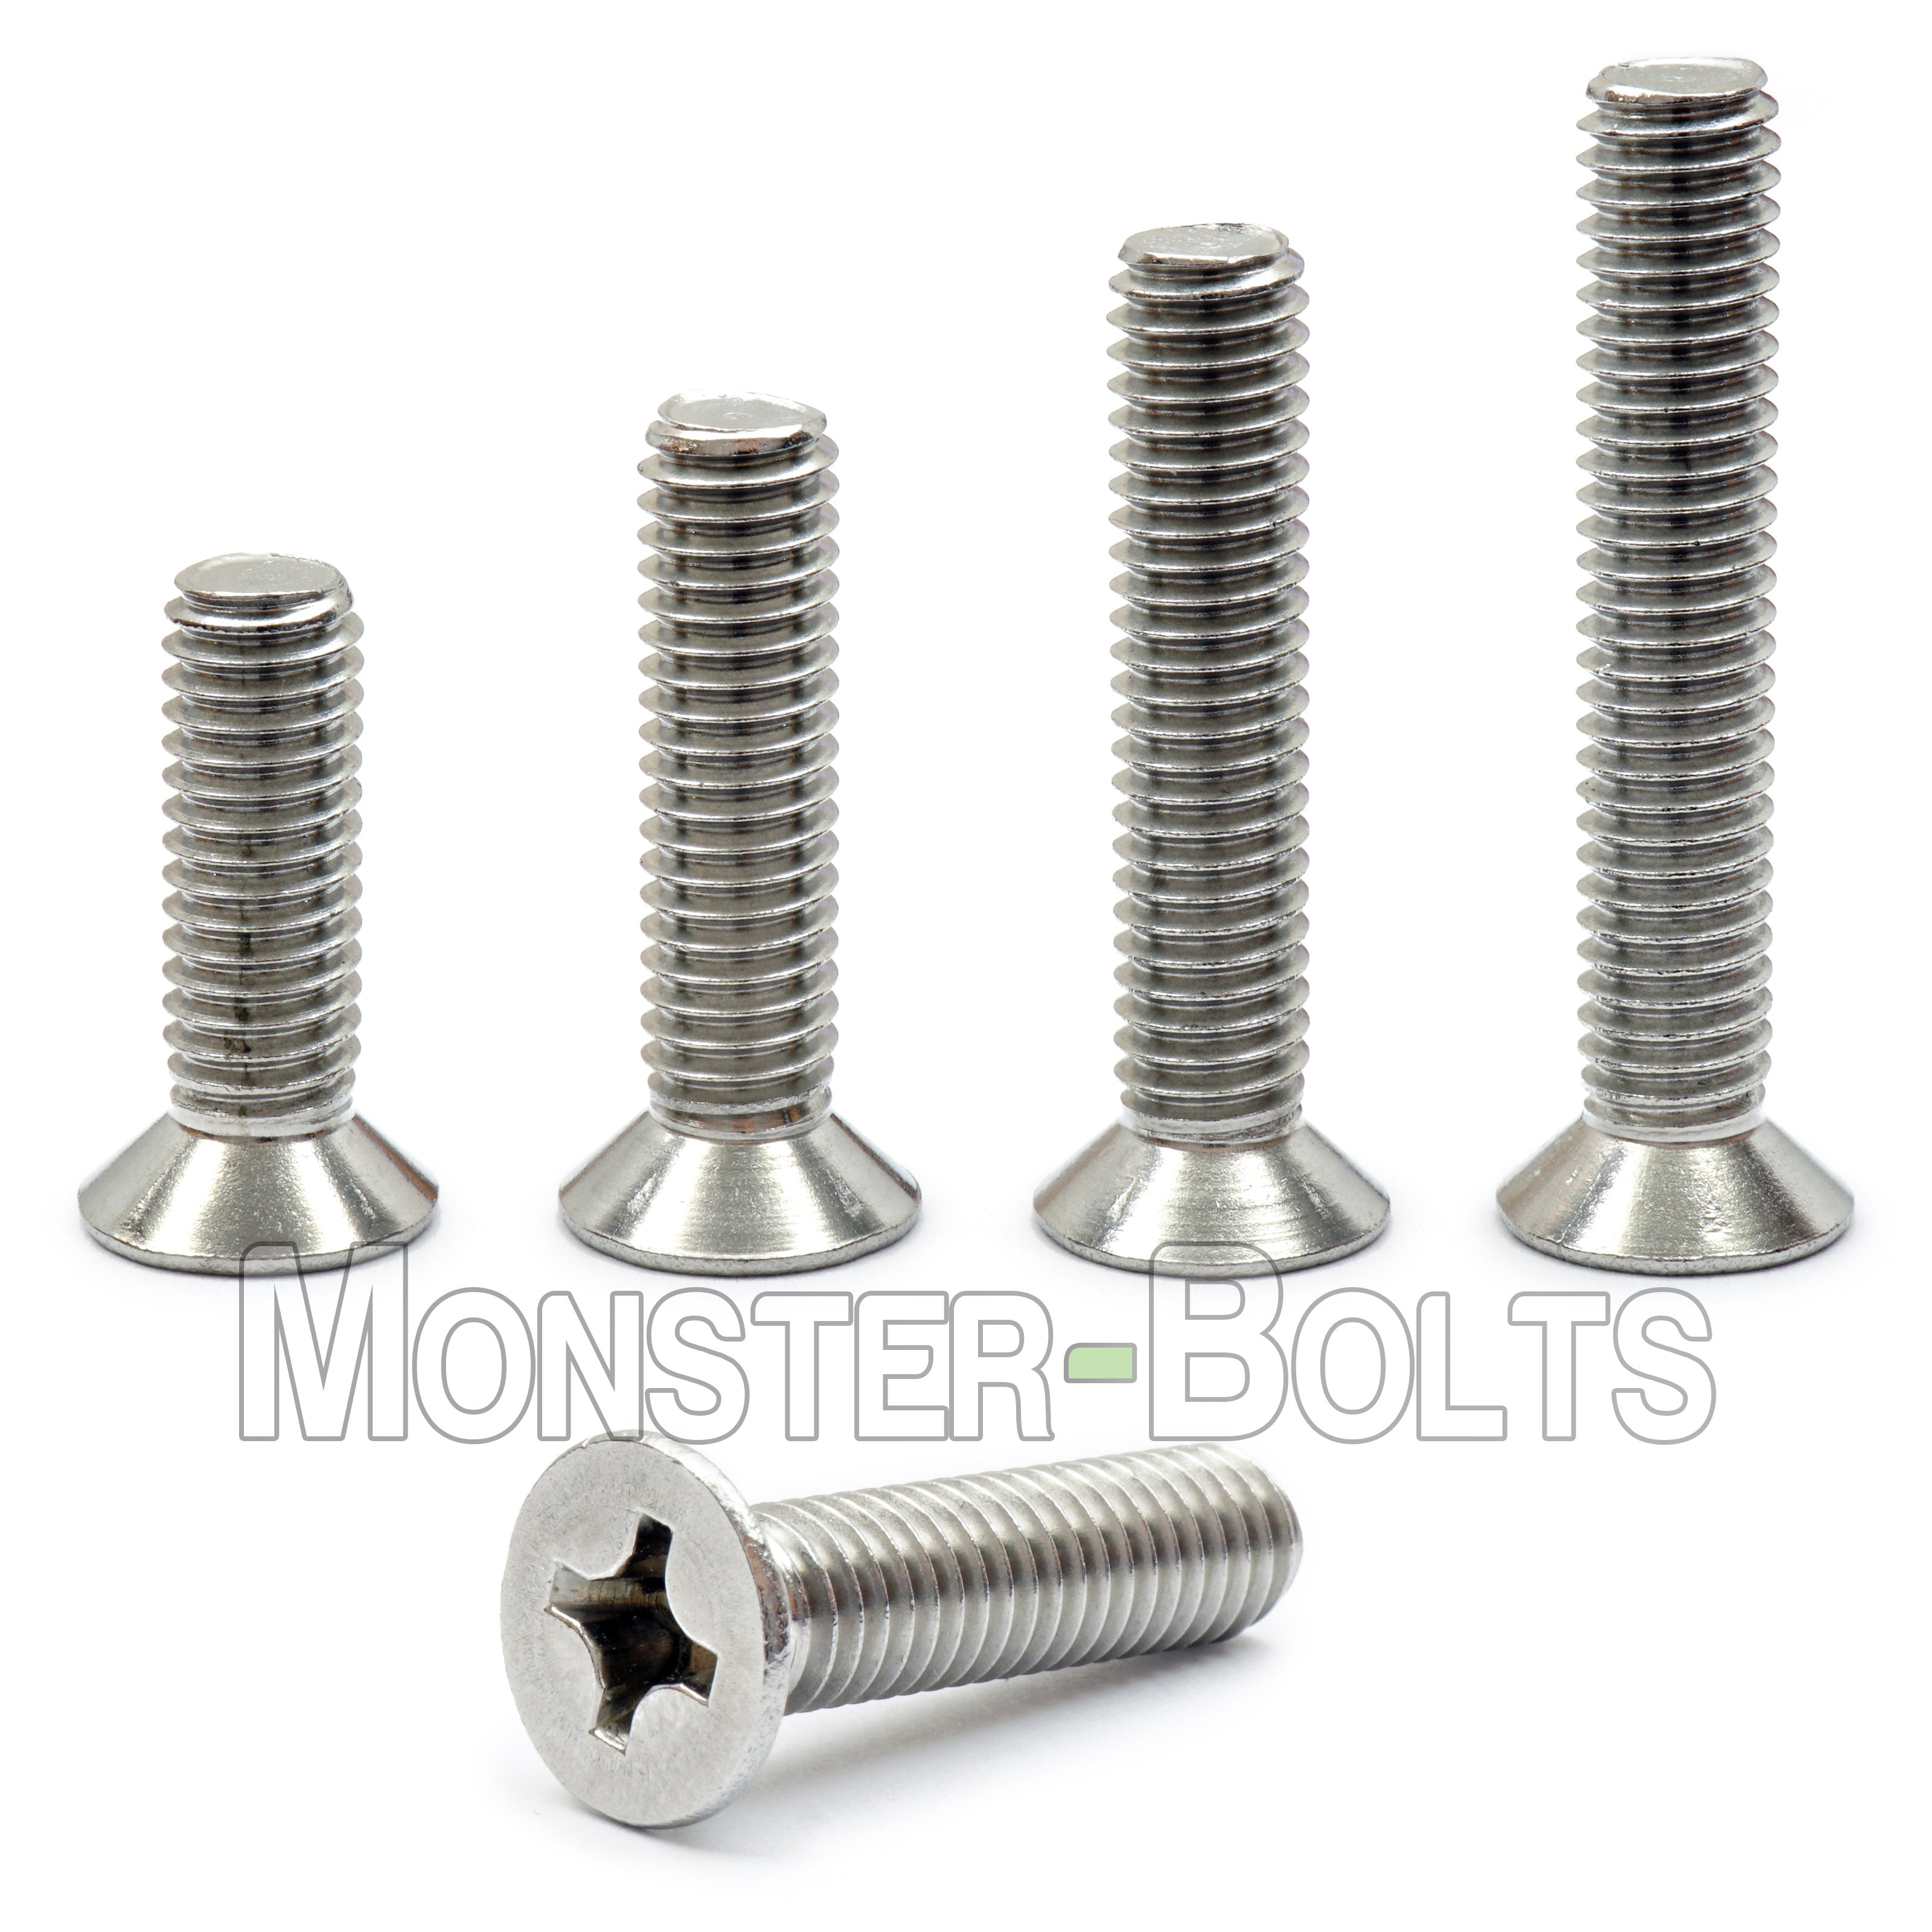 10-32 Pan Head Machine Screws Phillips Stainless Steel All Sizes Quantities 